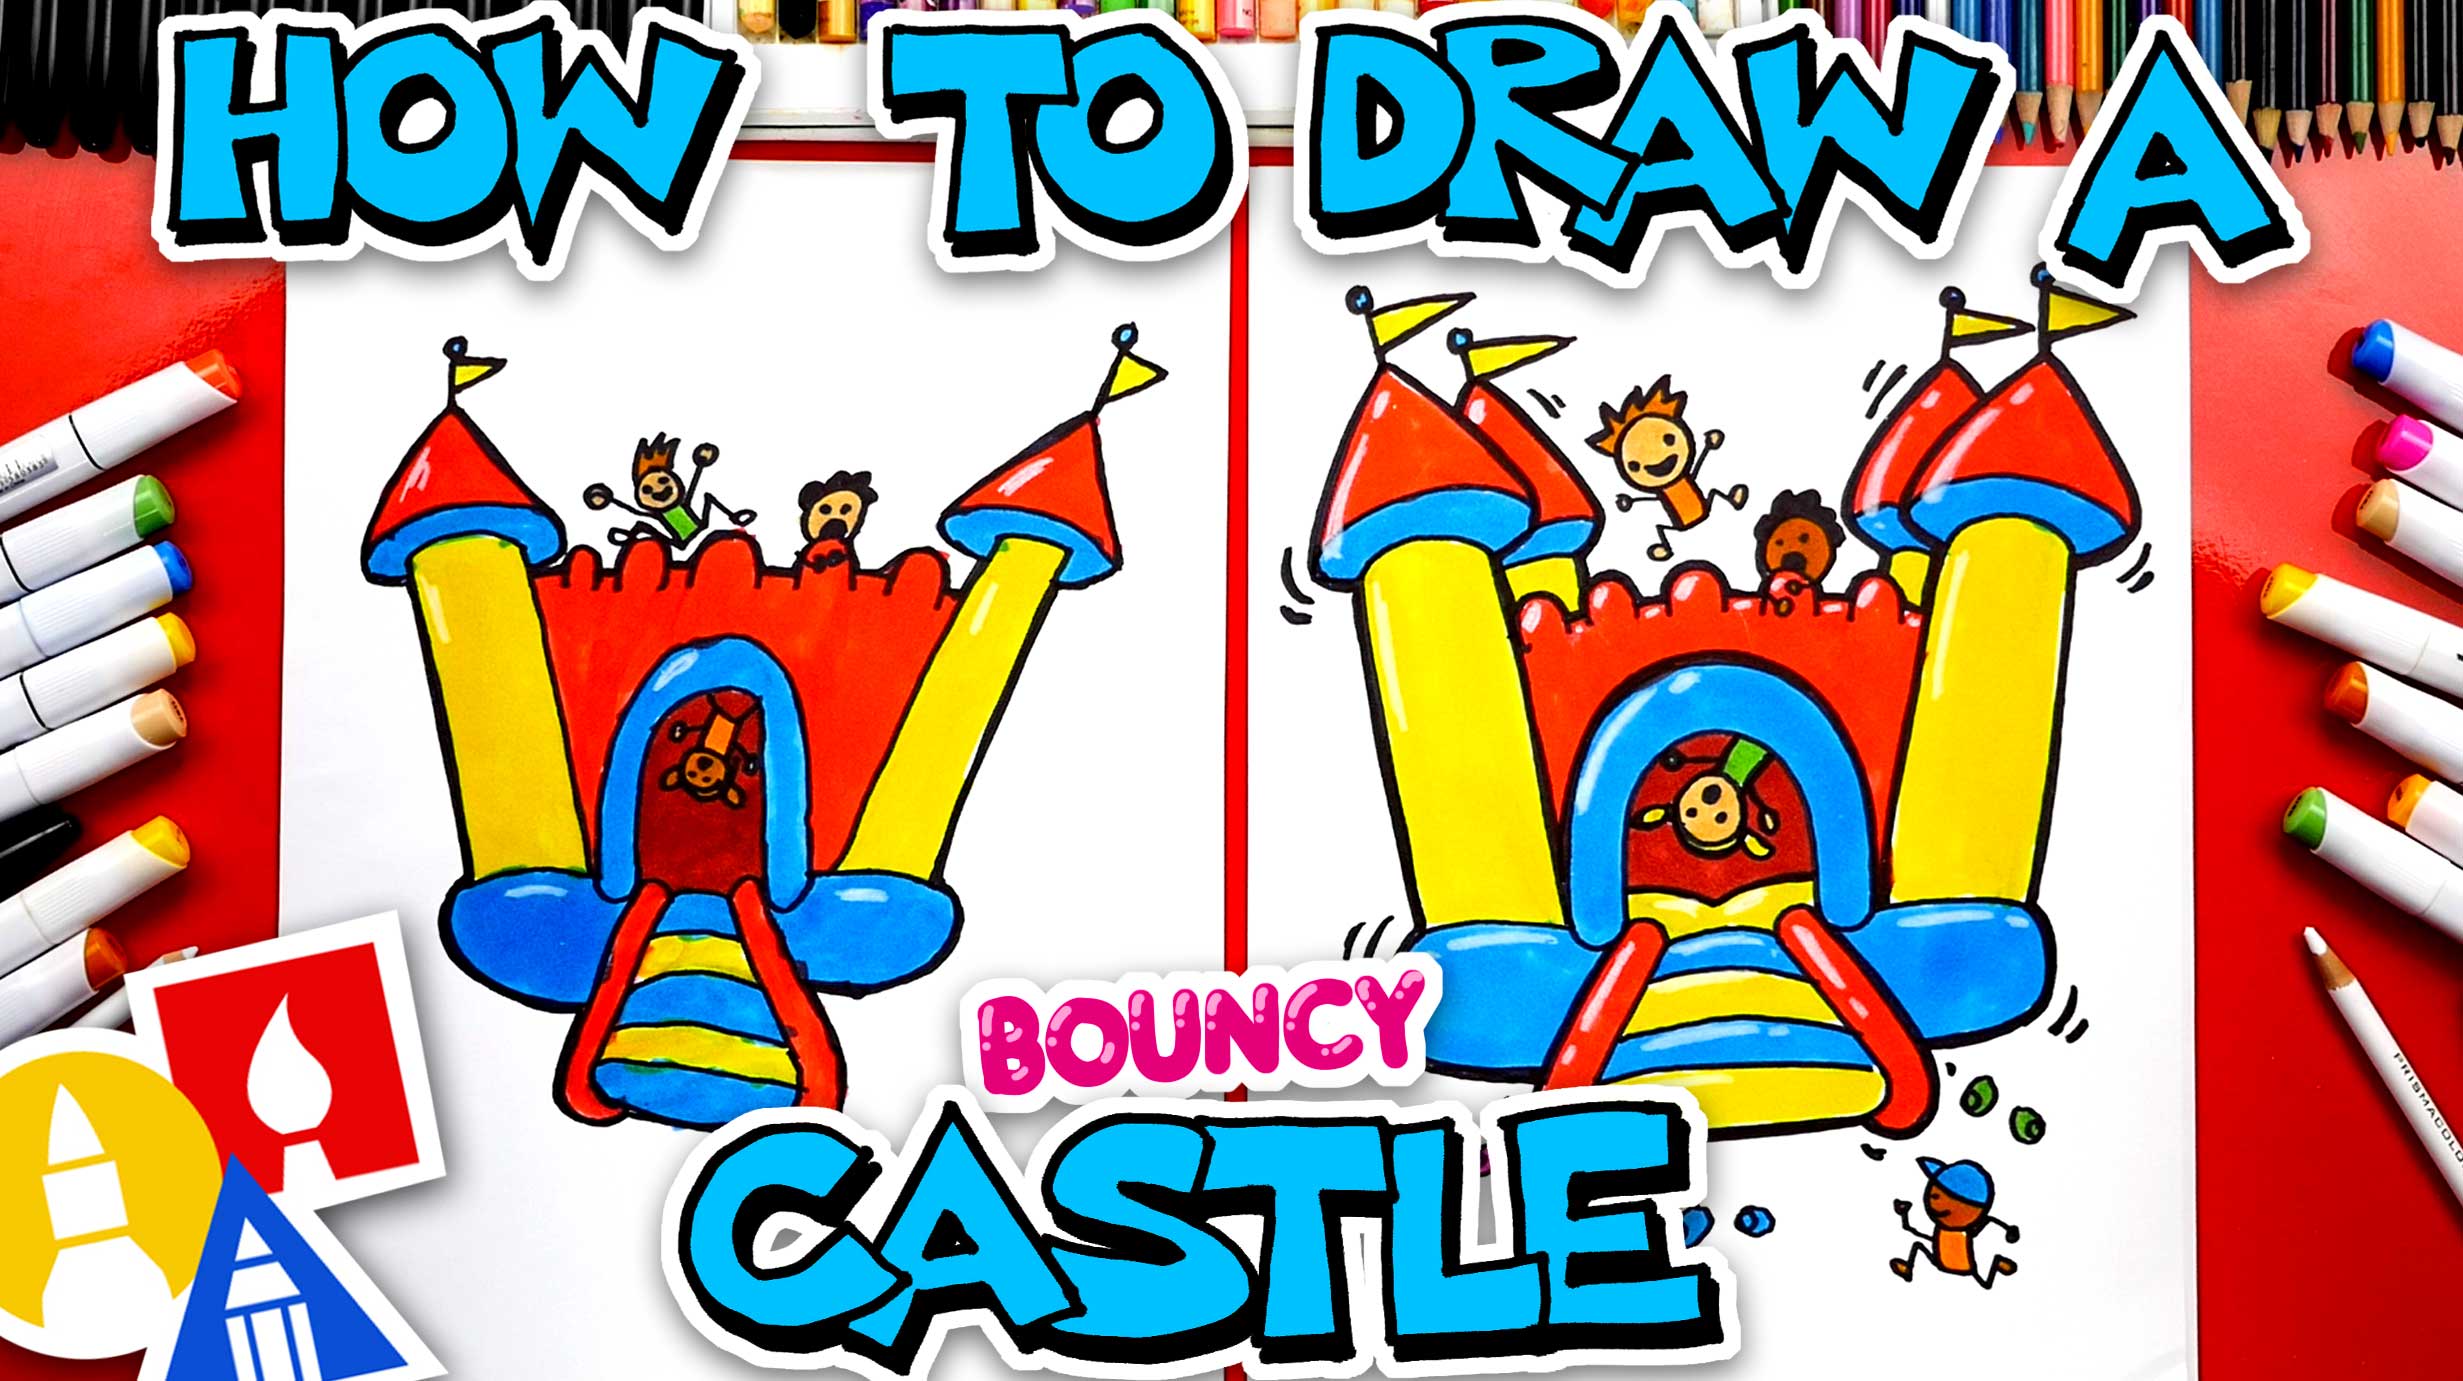 How To Draw A Bouncy Castle - Art For Kids Hub